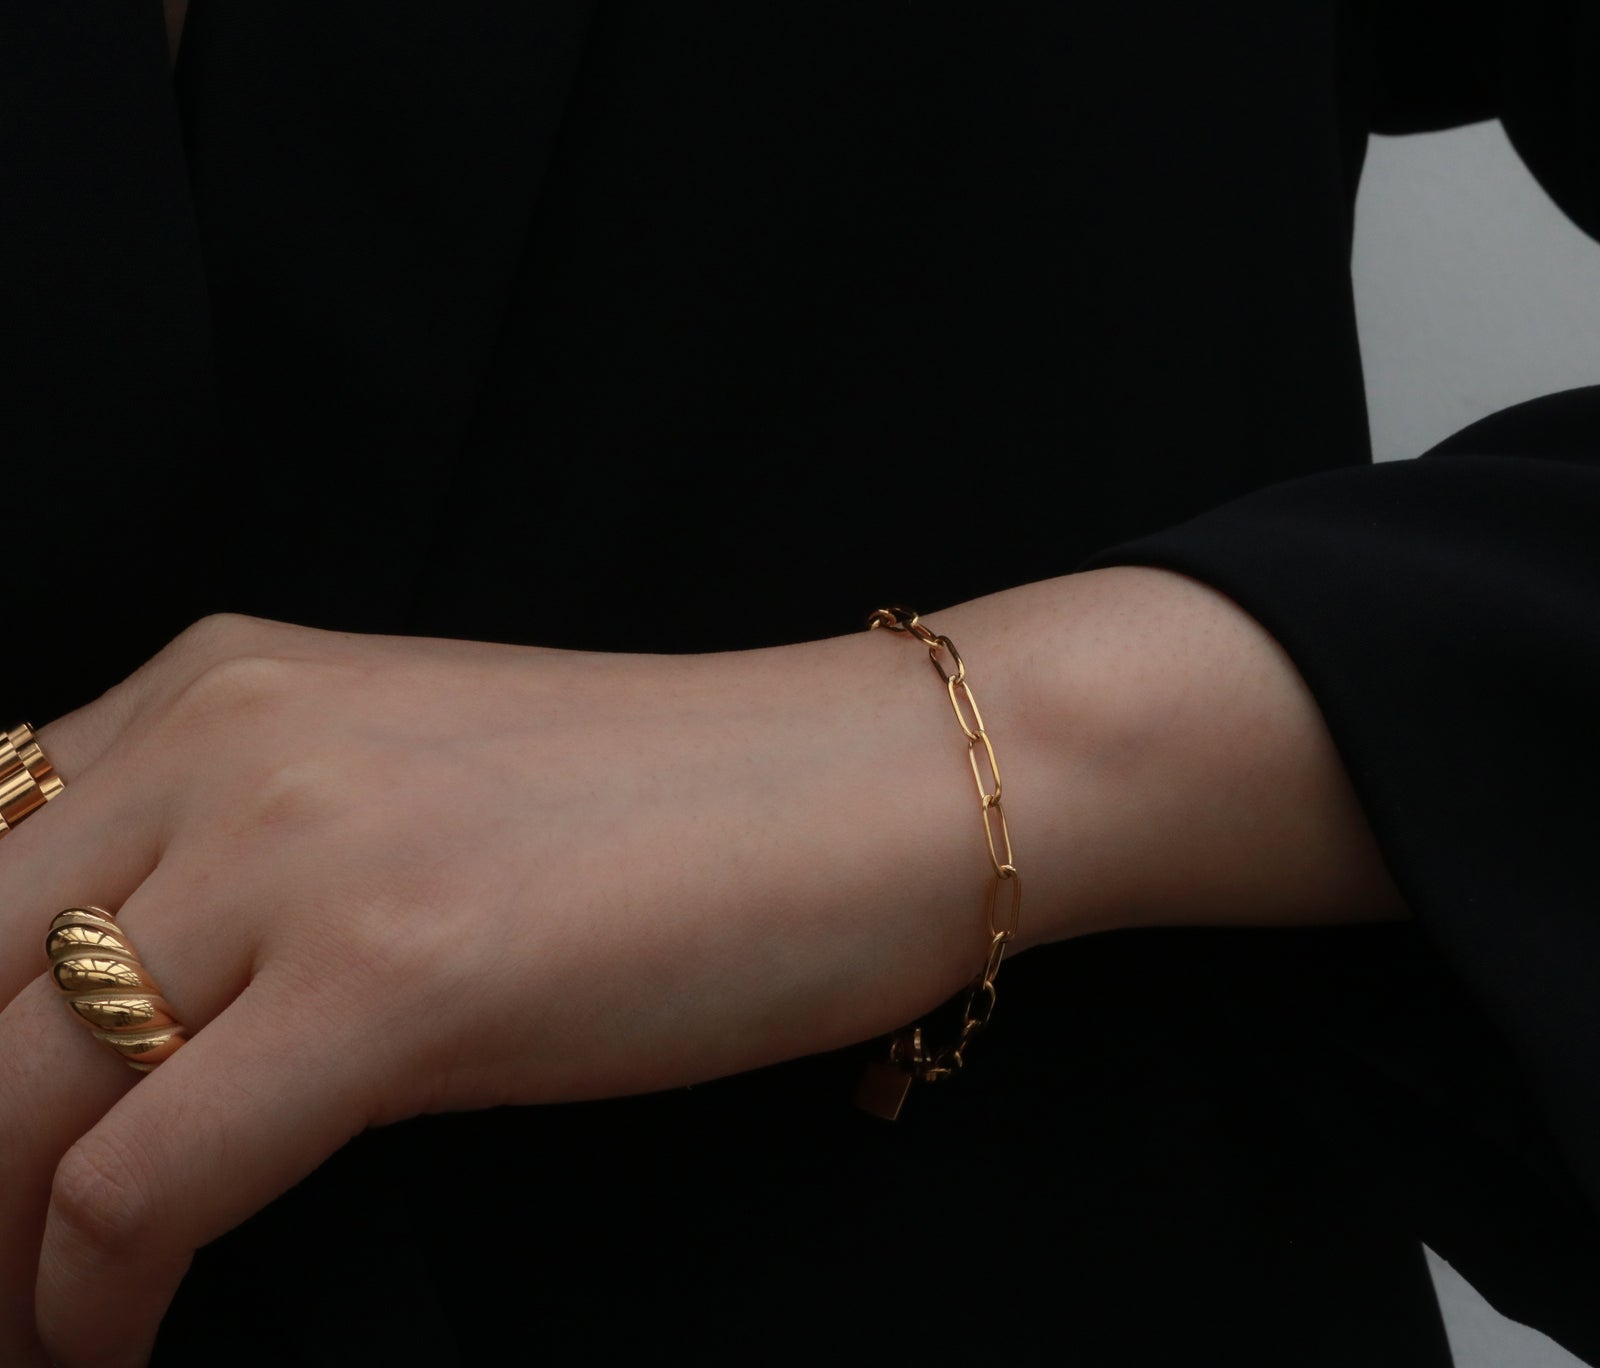 Women wearing gold rings and a link chain bracelet